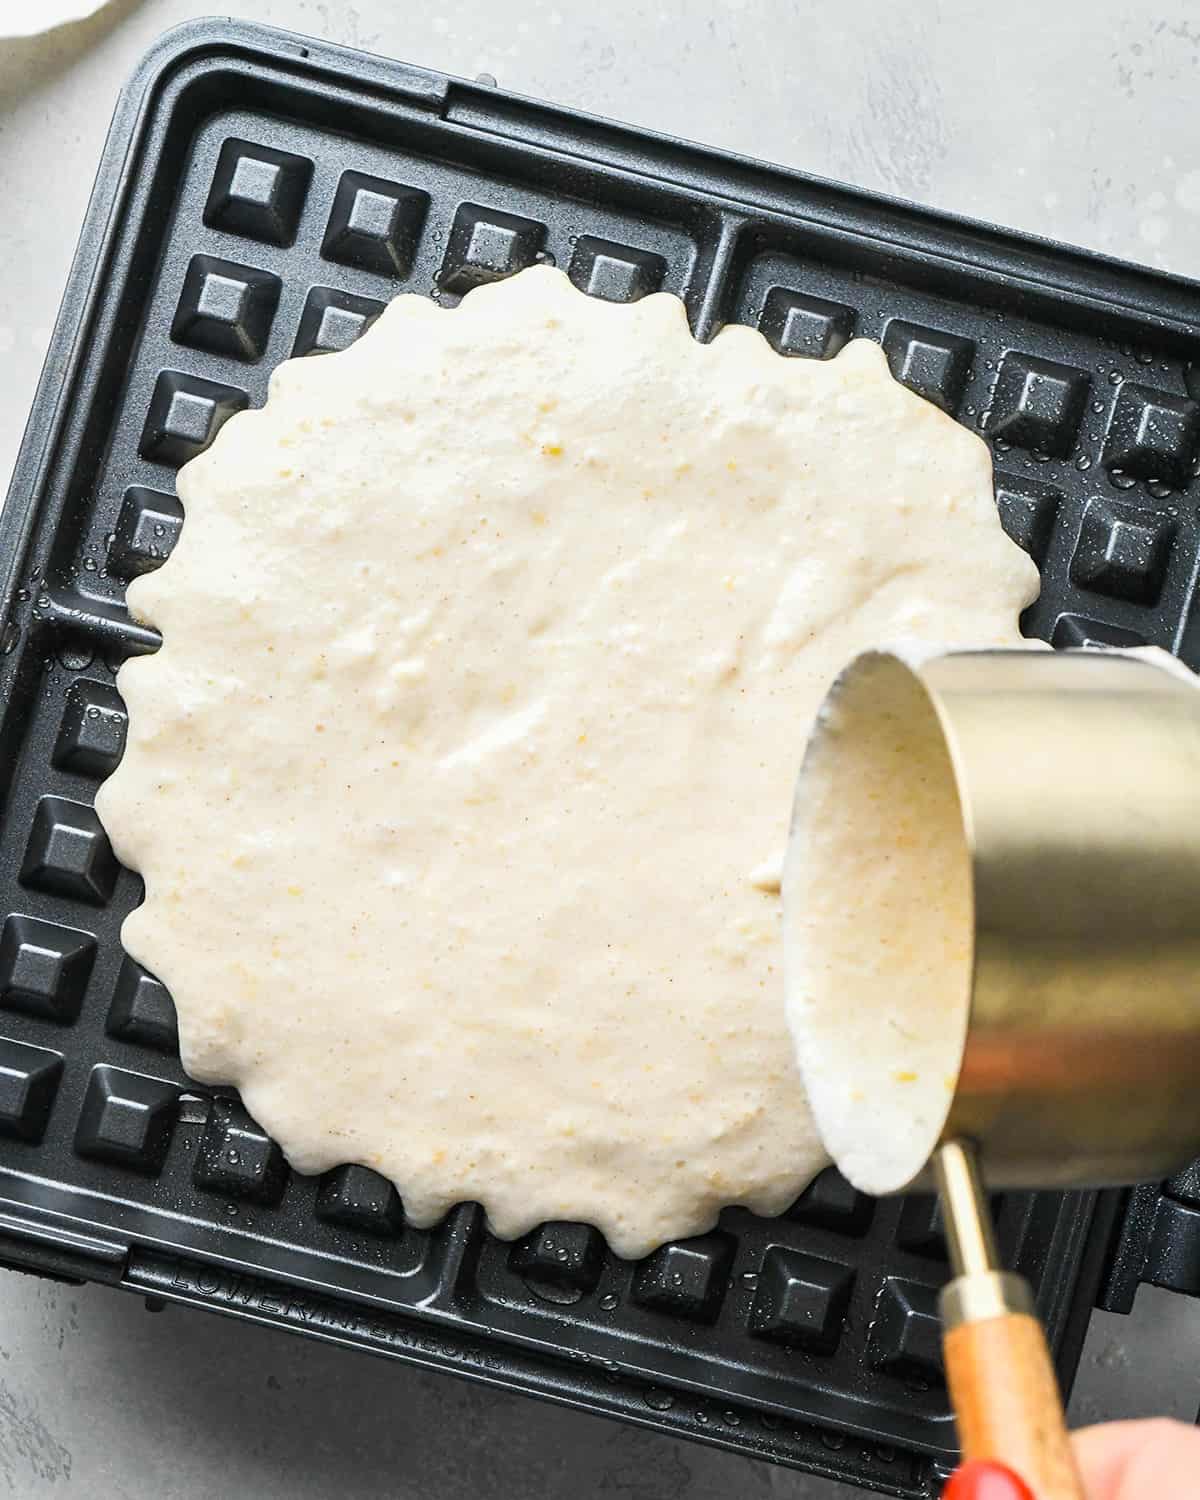 How to Make Waffles - waffle batter being poured into a preheated waffle maker